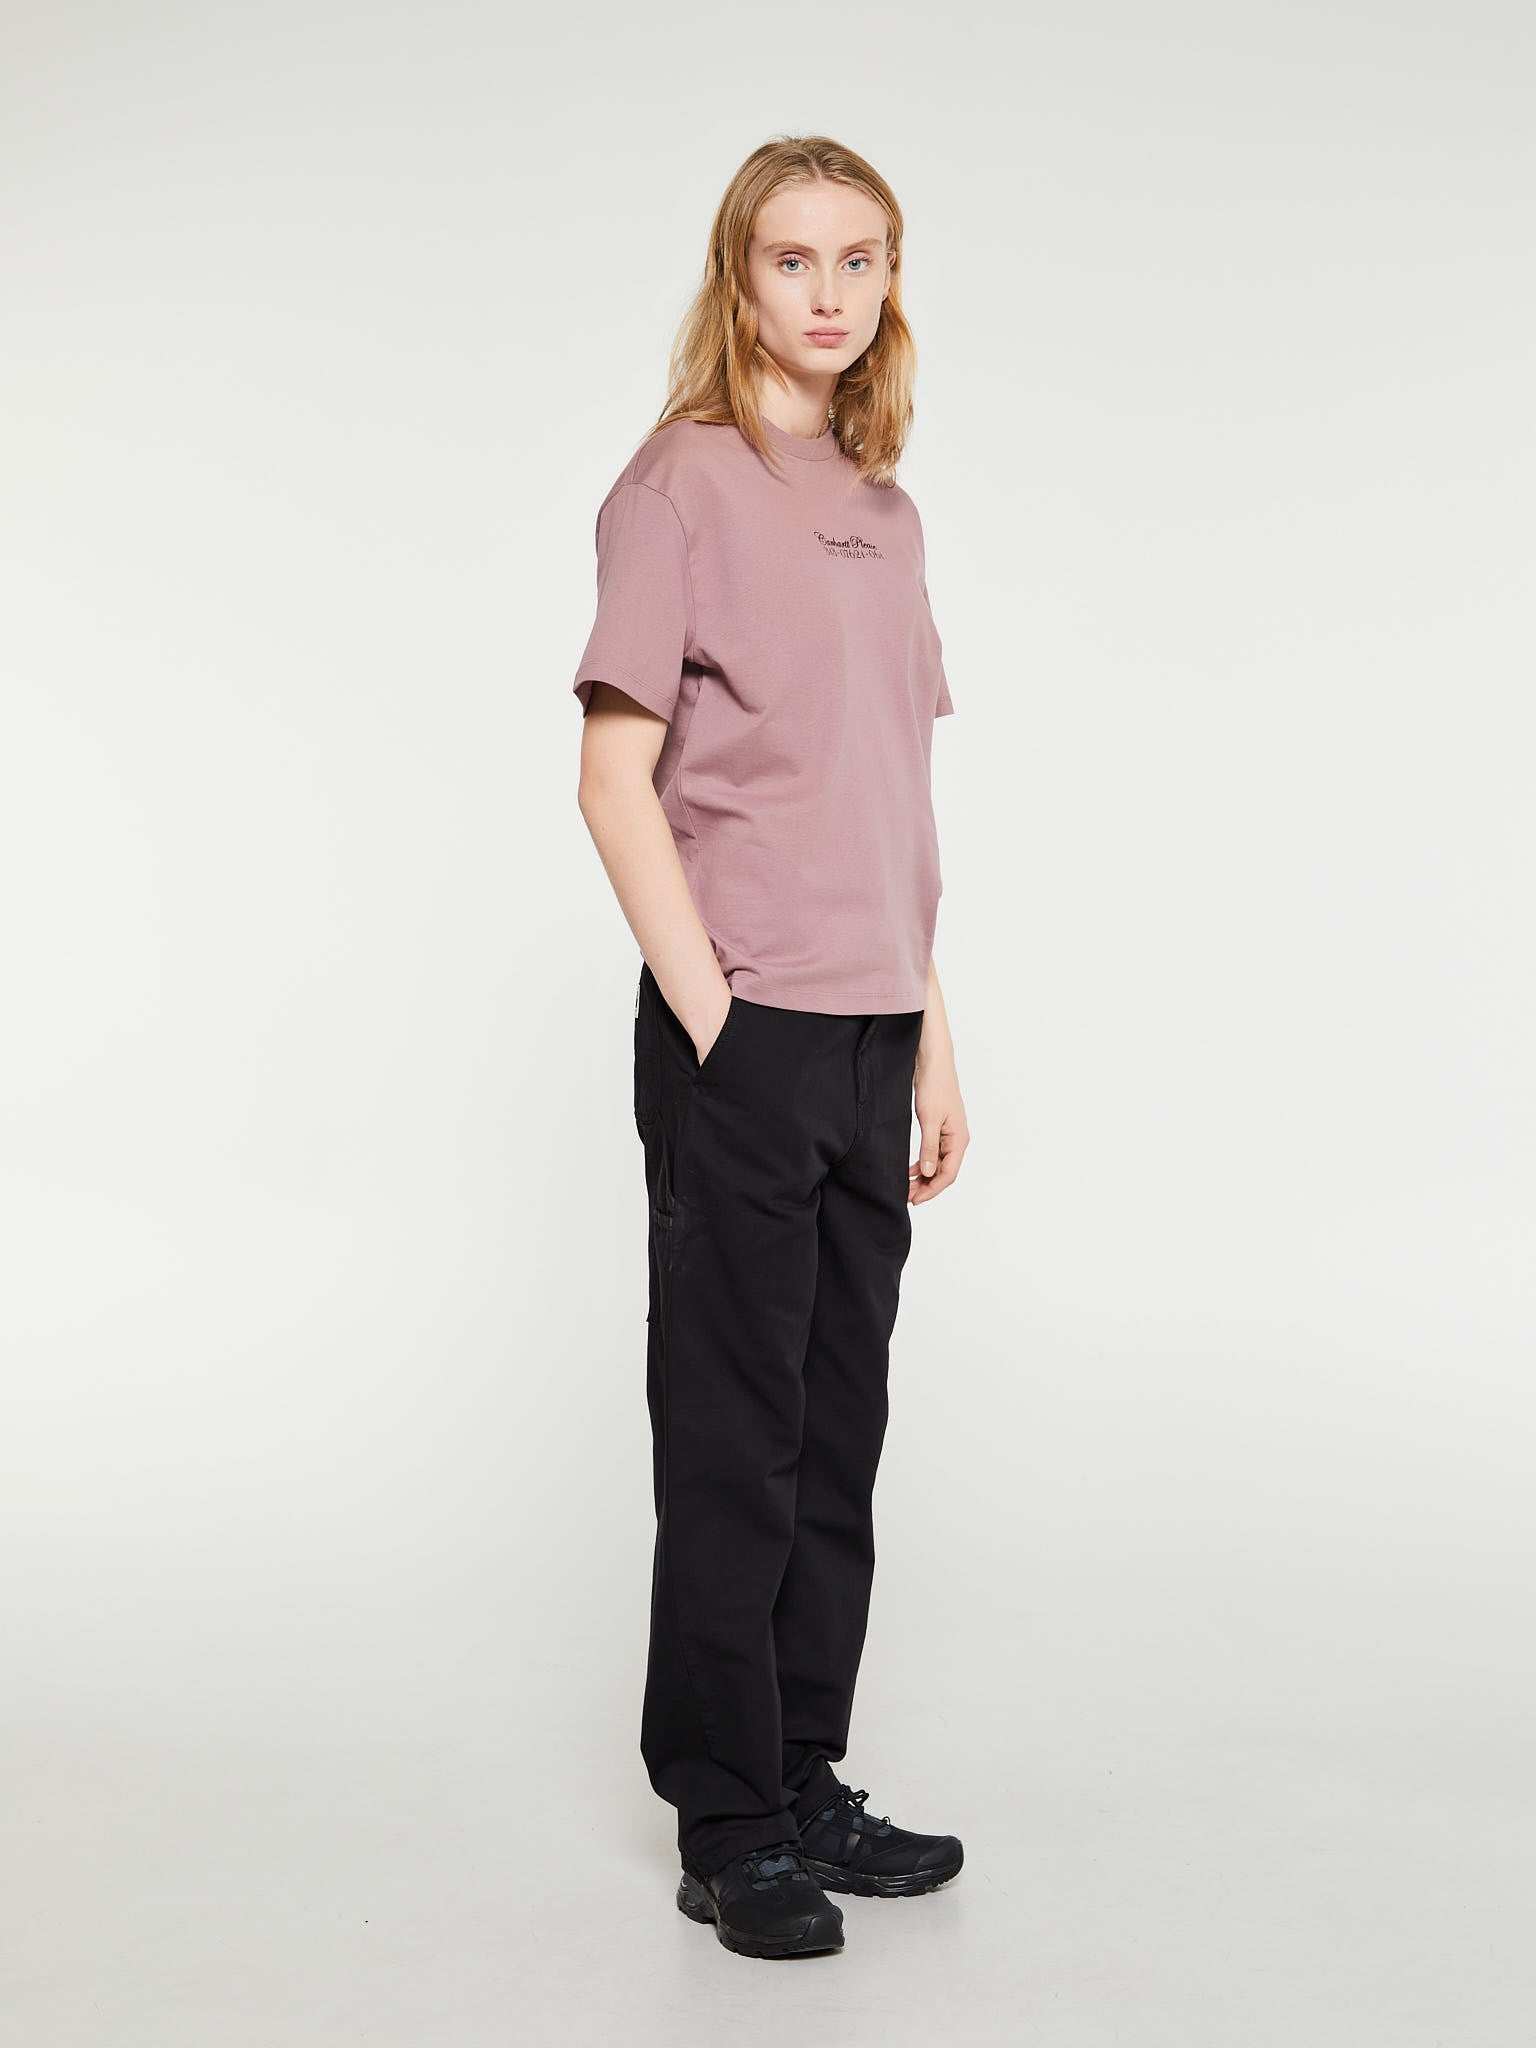 W' Carhartt Please T-Shirt in Daphne and Black